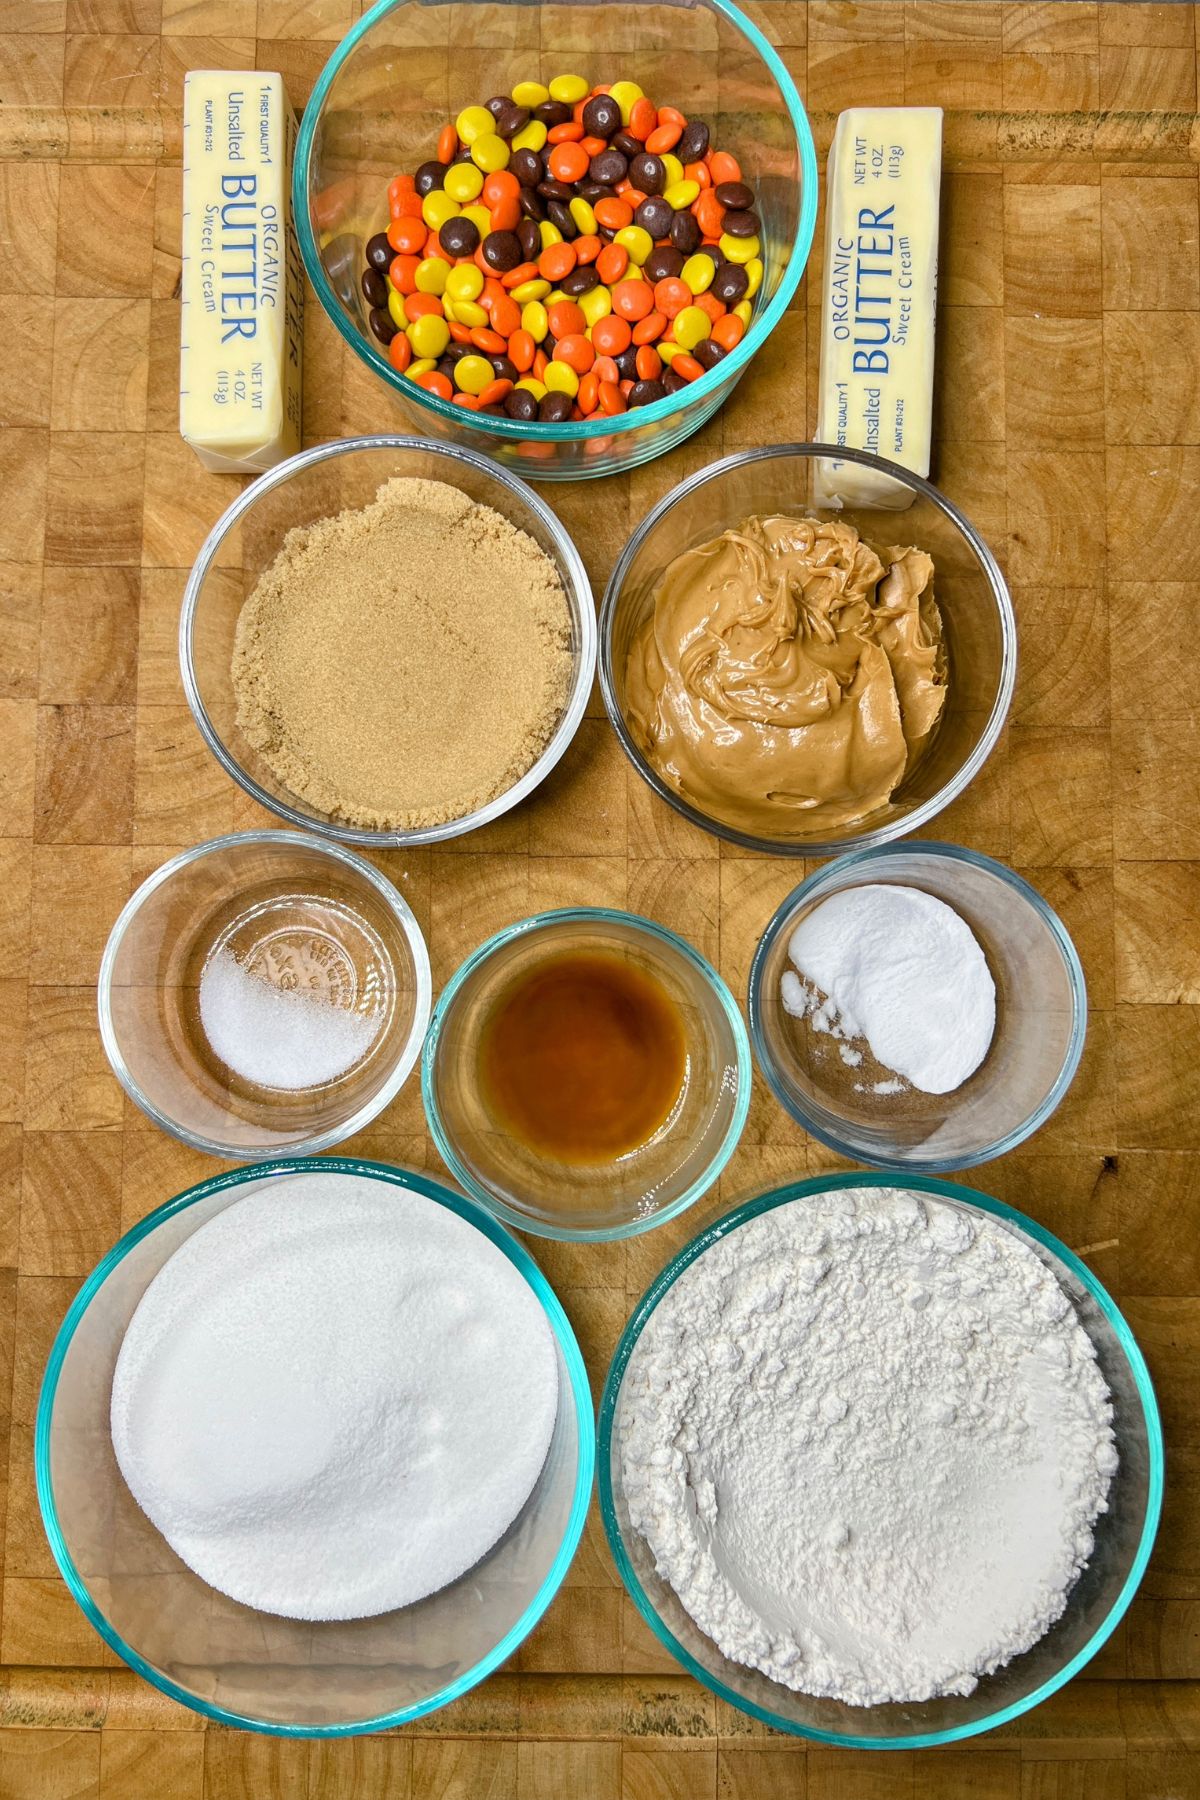 Reeses pieces peanut butter cookie ingredients on a wooden table.